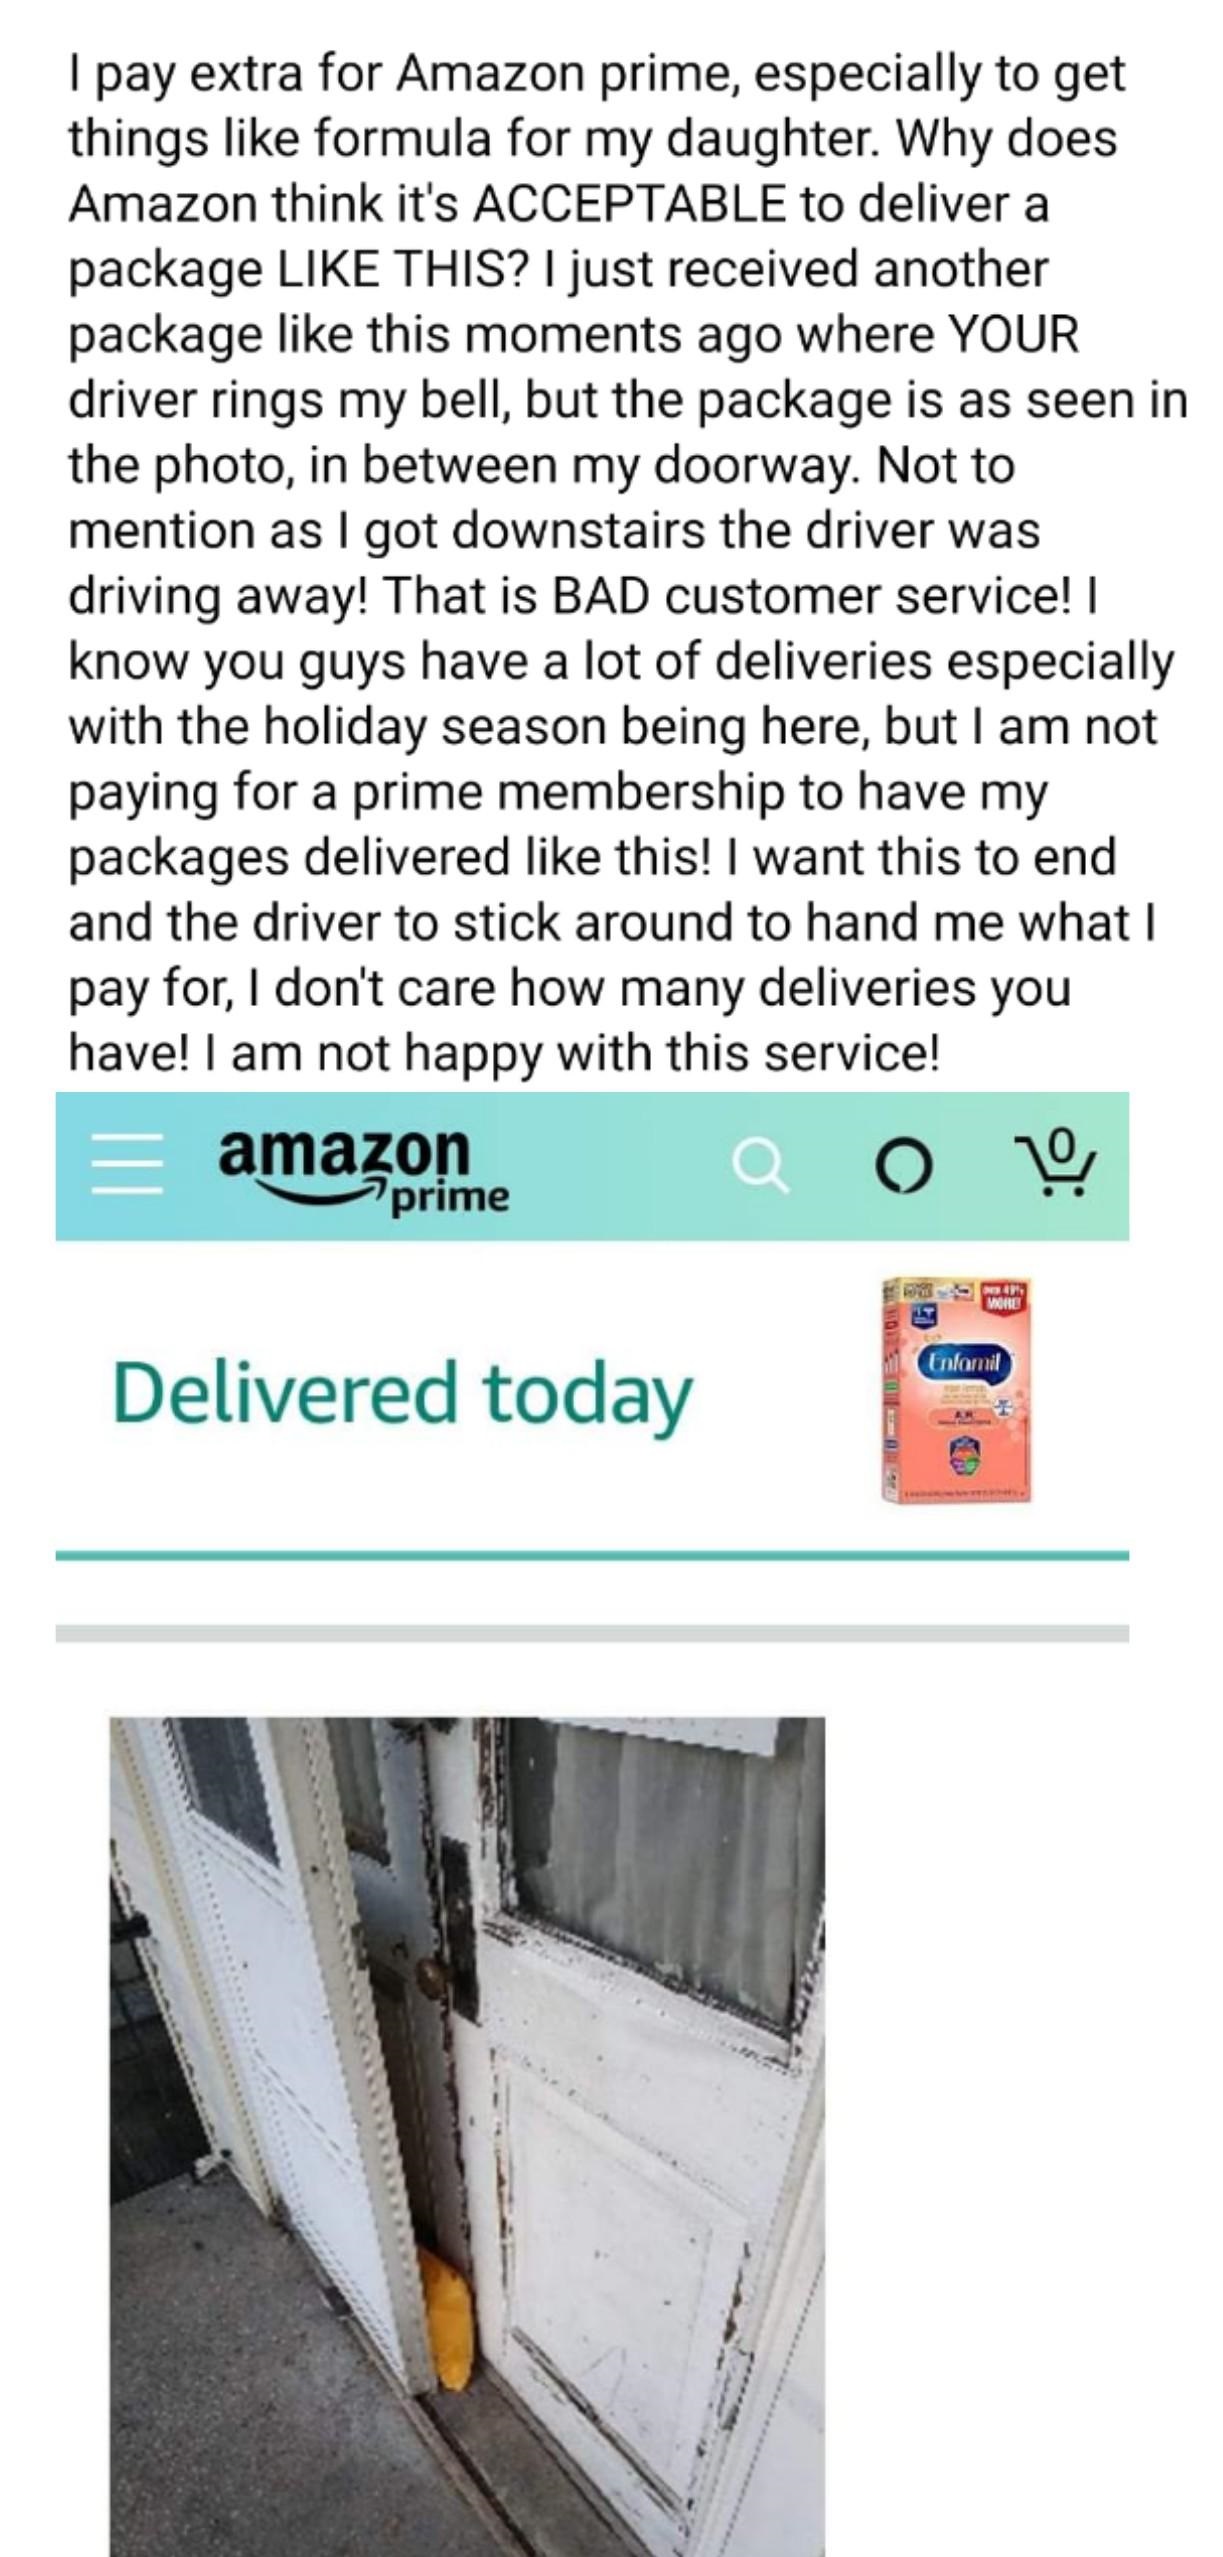 material - I pay extra for Amazon prime, especially to get things formula for my daughter. Why does Amazon think it's Acceptable to deliver a package This? I just received another package this moments ago where Your driver rings my bell, but the package i